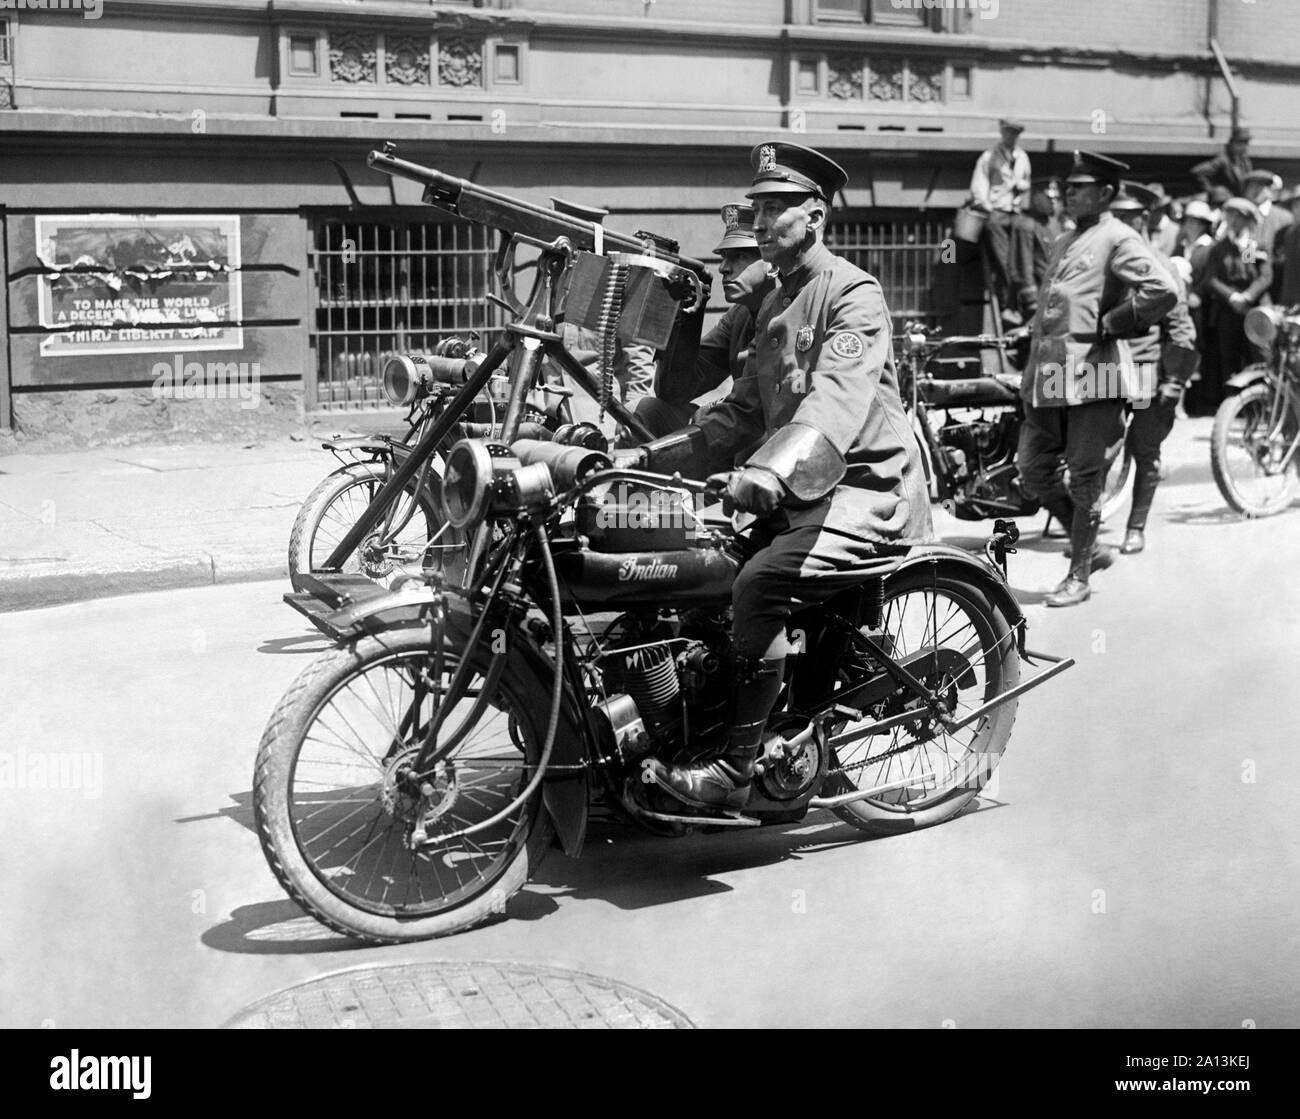 A police officer leading a parade in New York City with a machine gun mounted onto his motorcycle. Stock Photo